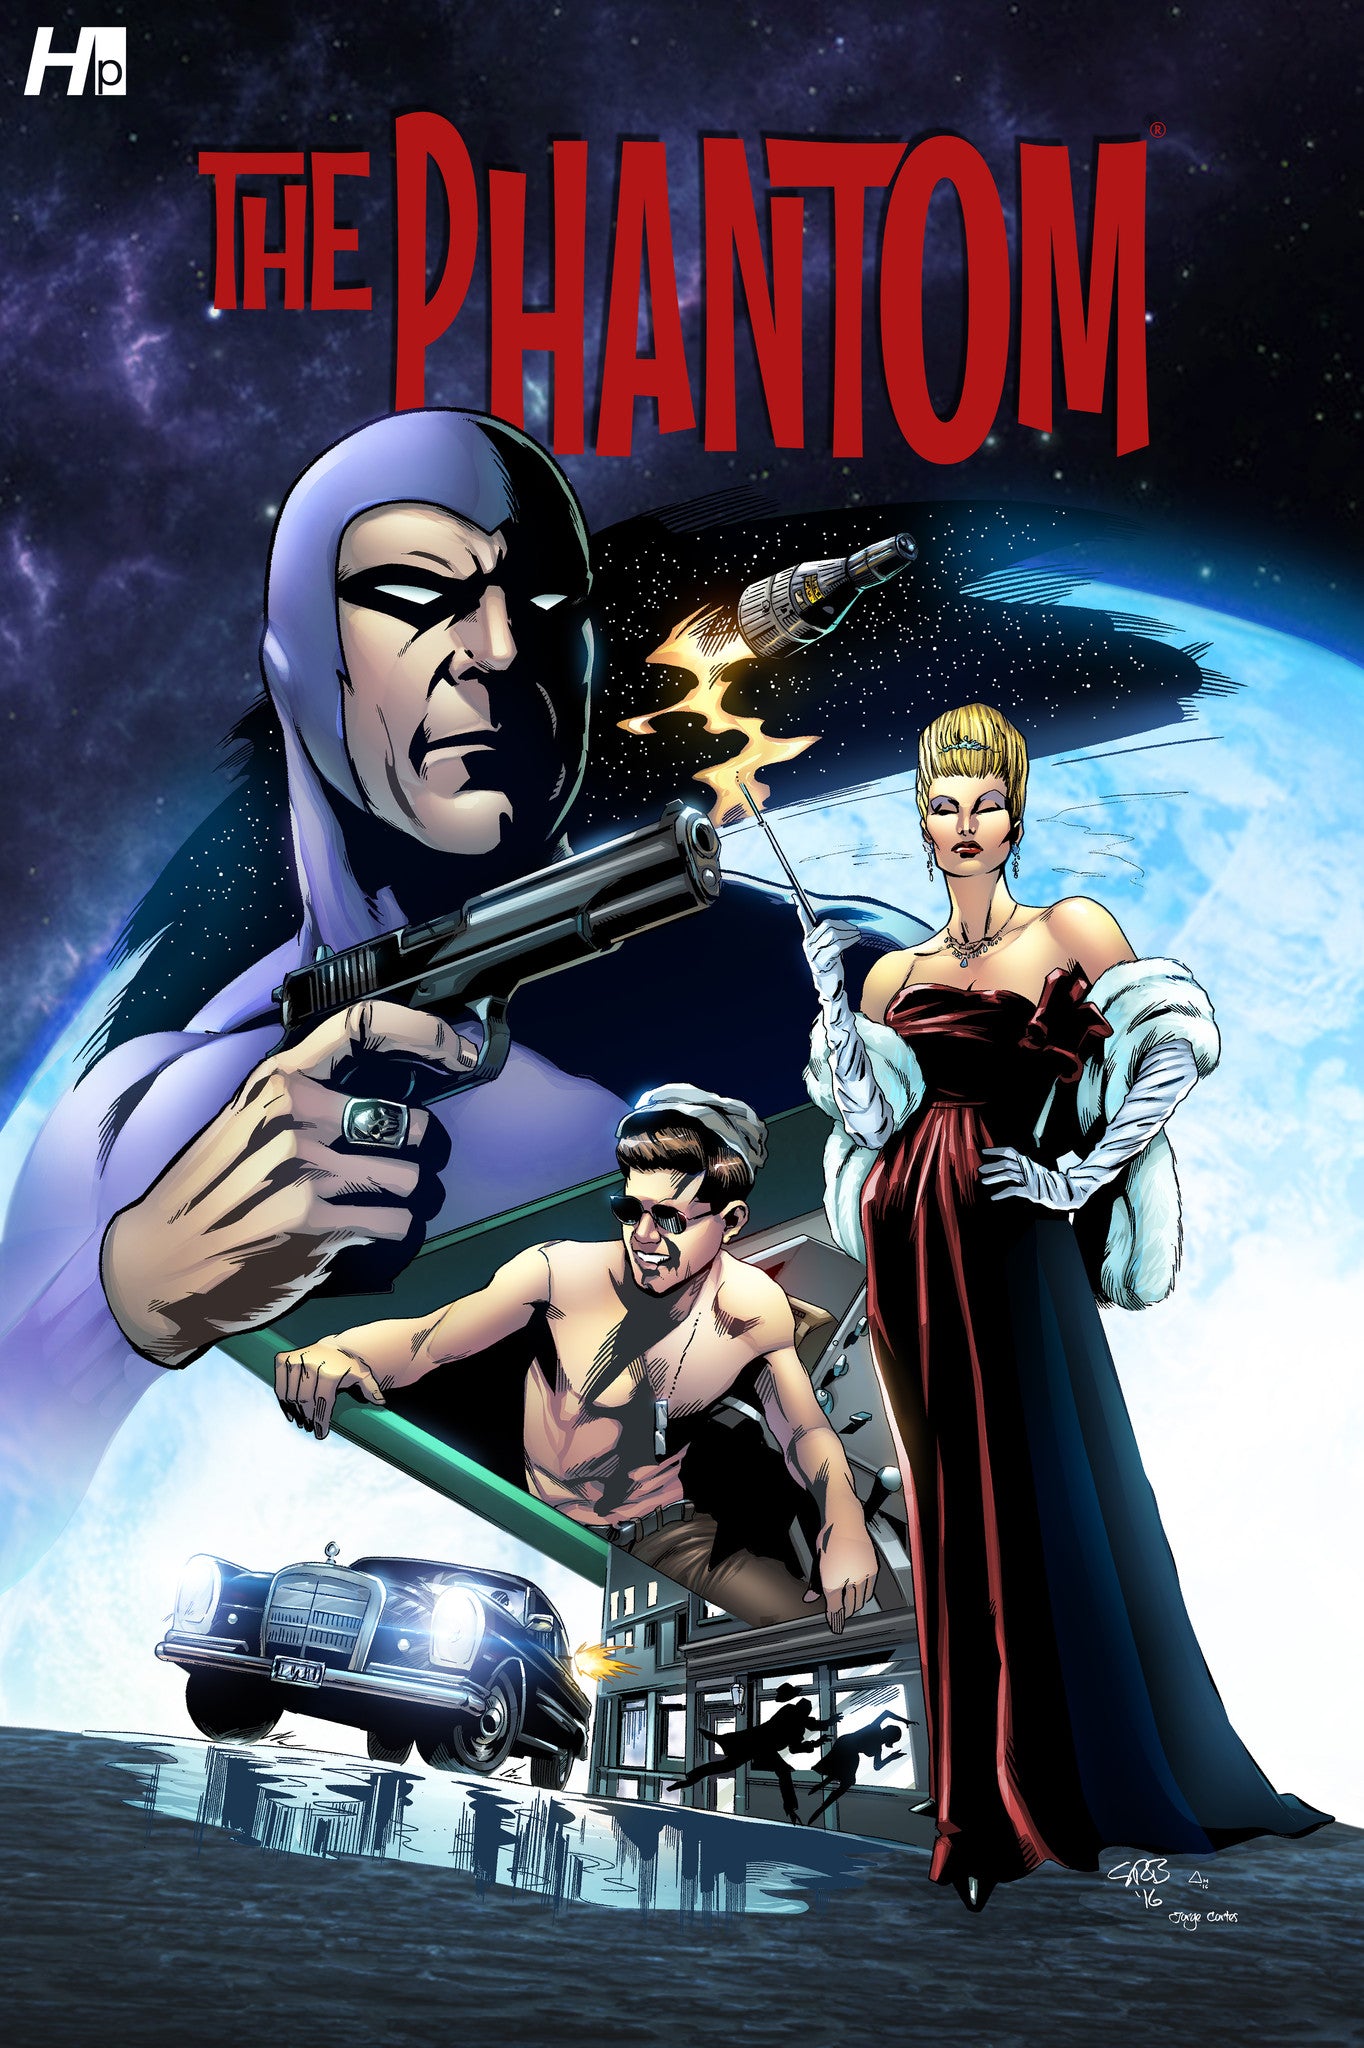 The Phantom: President Kennedy's Mission Issue #1